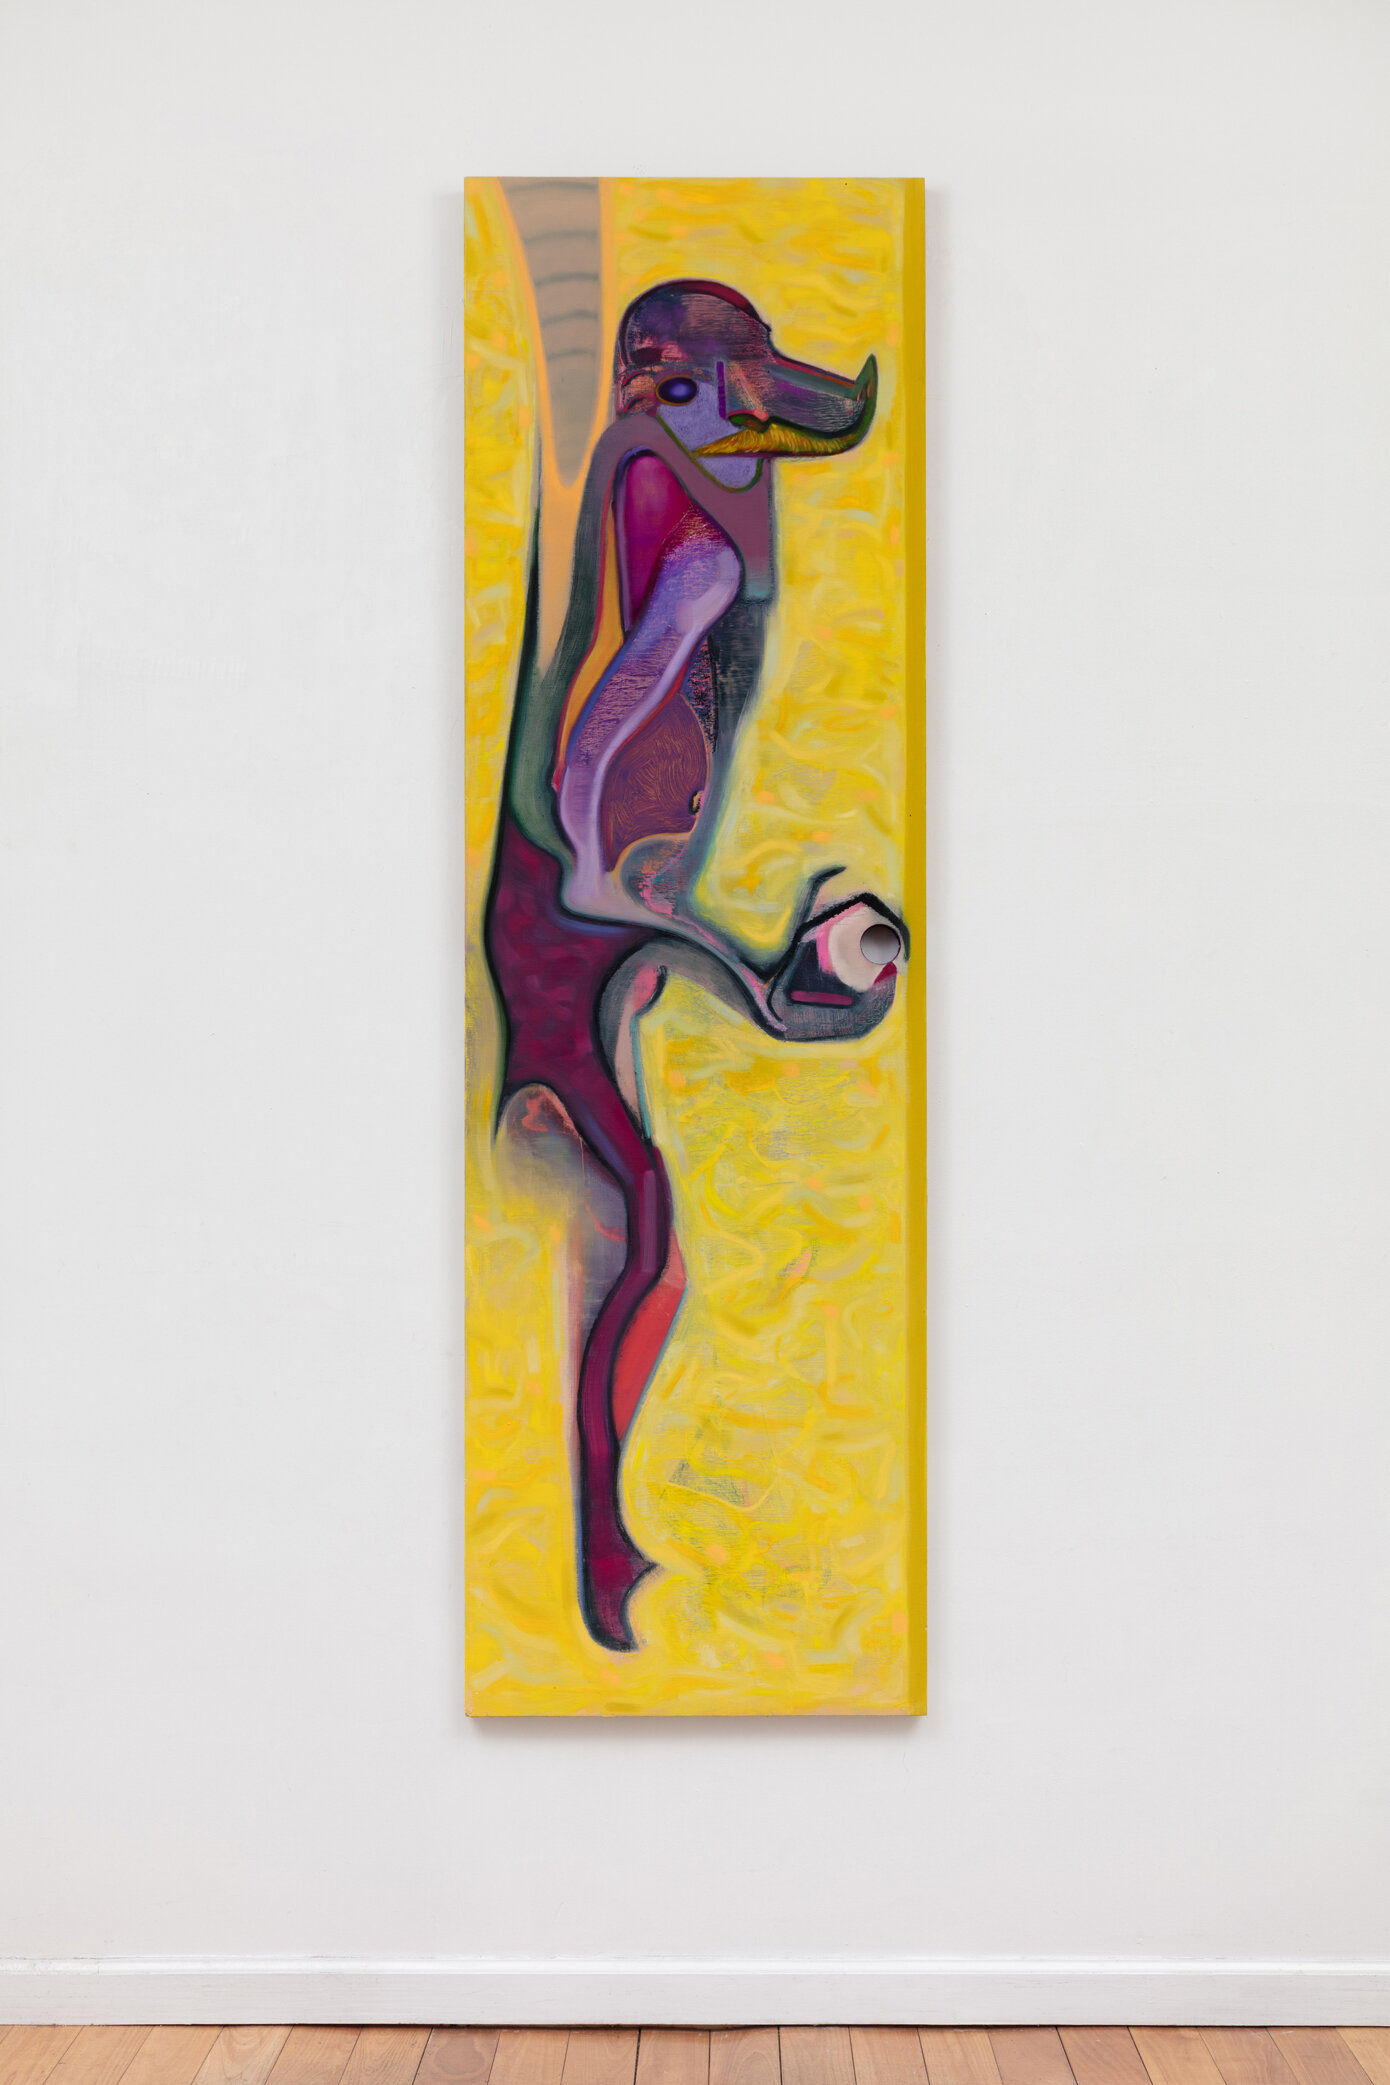   Violet Bat,  2020-21. Oil on wood. 80 x 24 inches. 